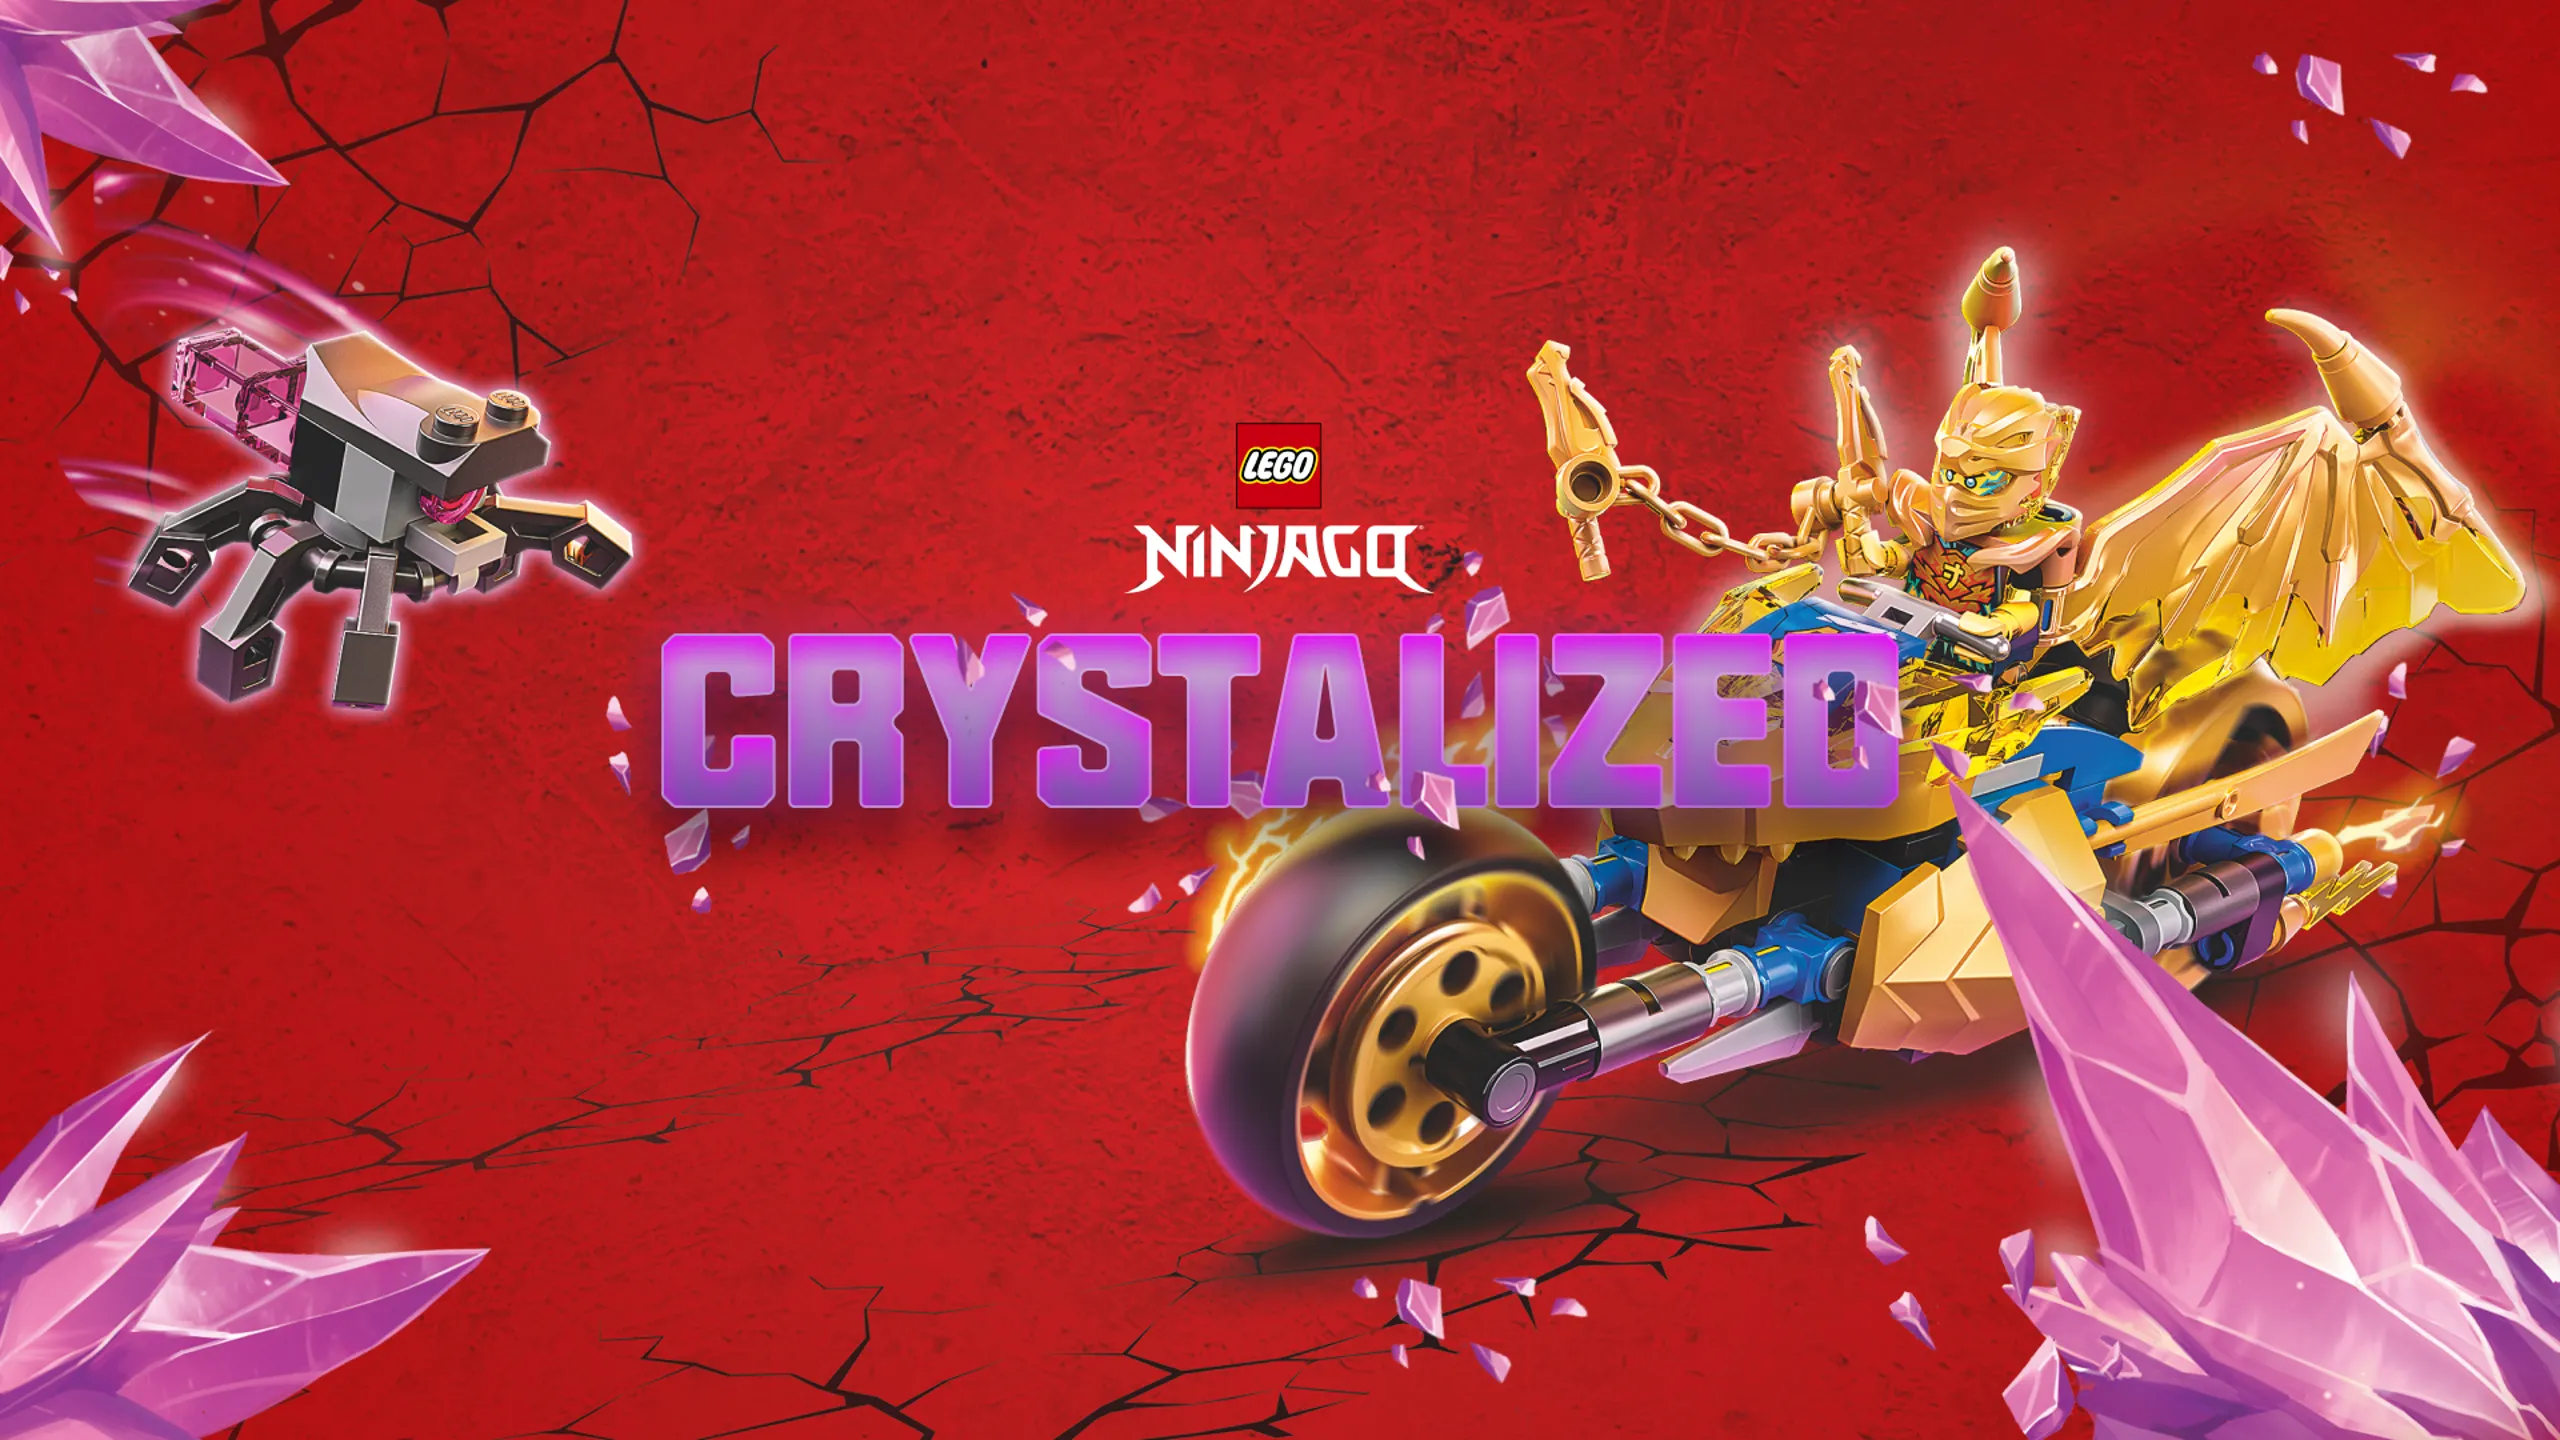 Play the NEW Crystalized game!